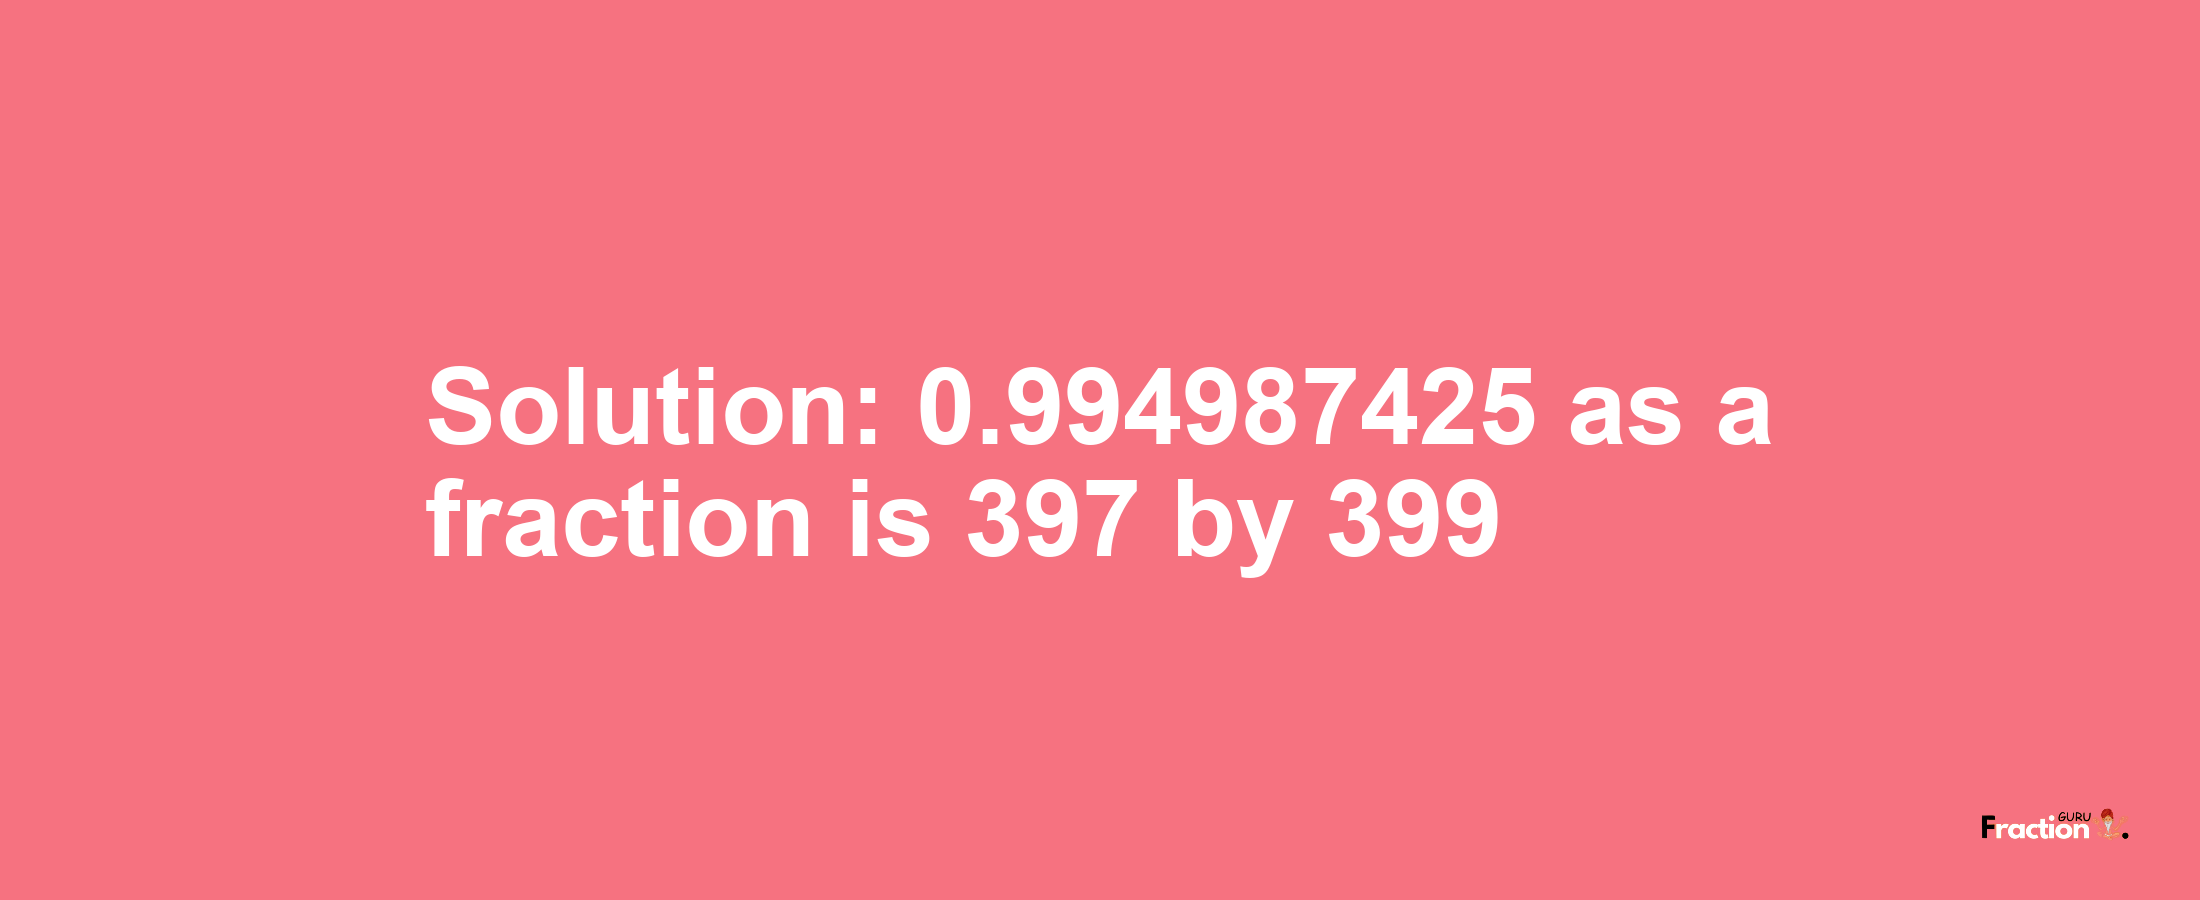 Solution:0.994987425 as a fraction is 397/399